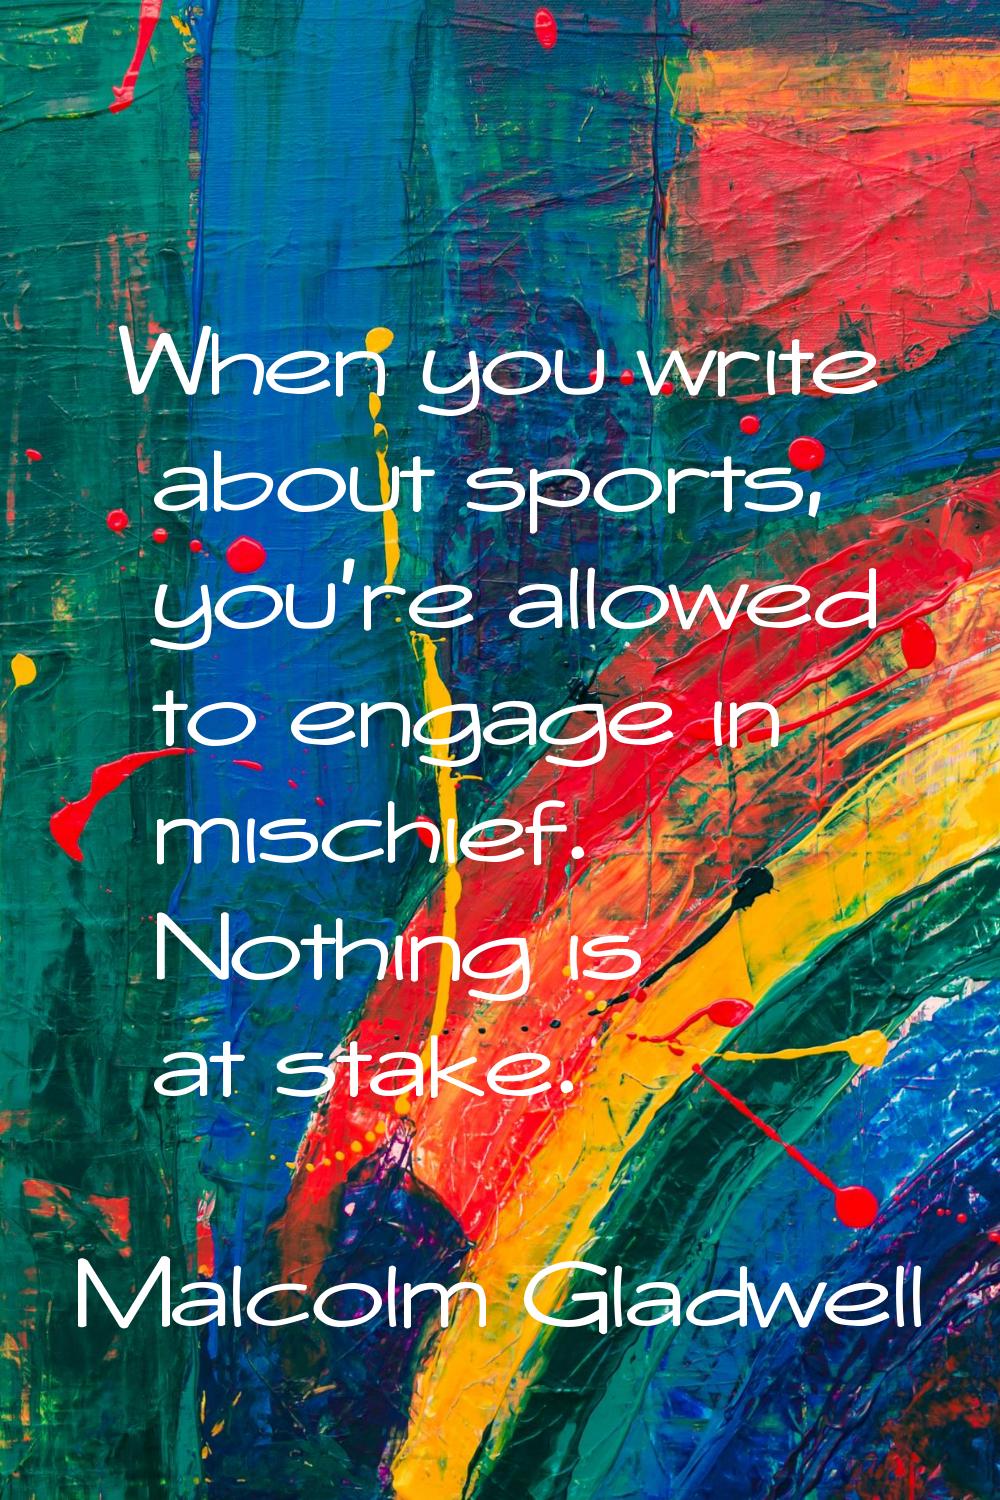 When you write about sports, you're allowed to engage in mischief. Nothing is at stake.